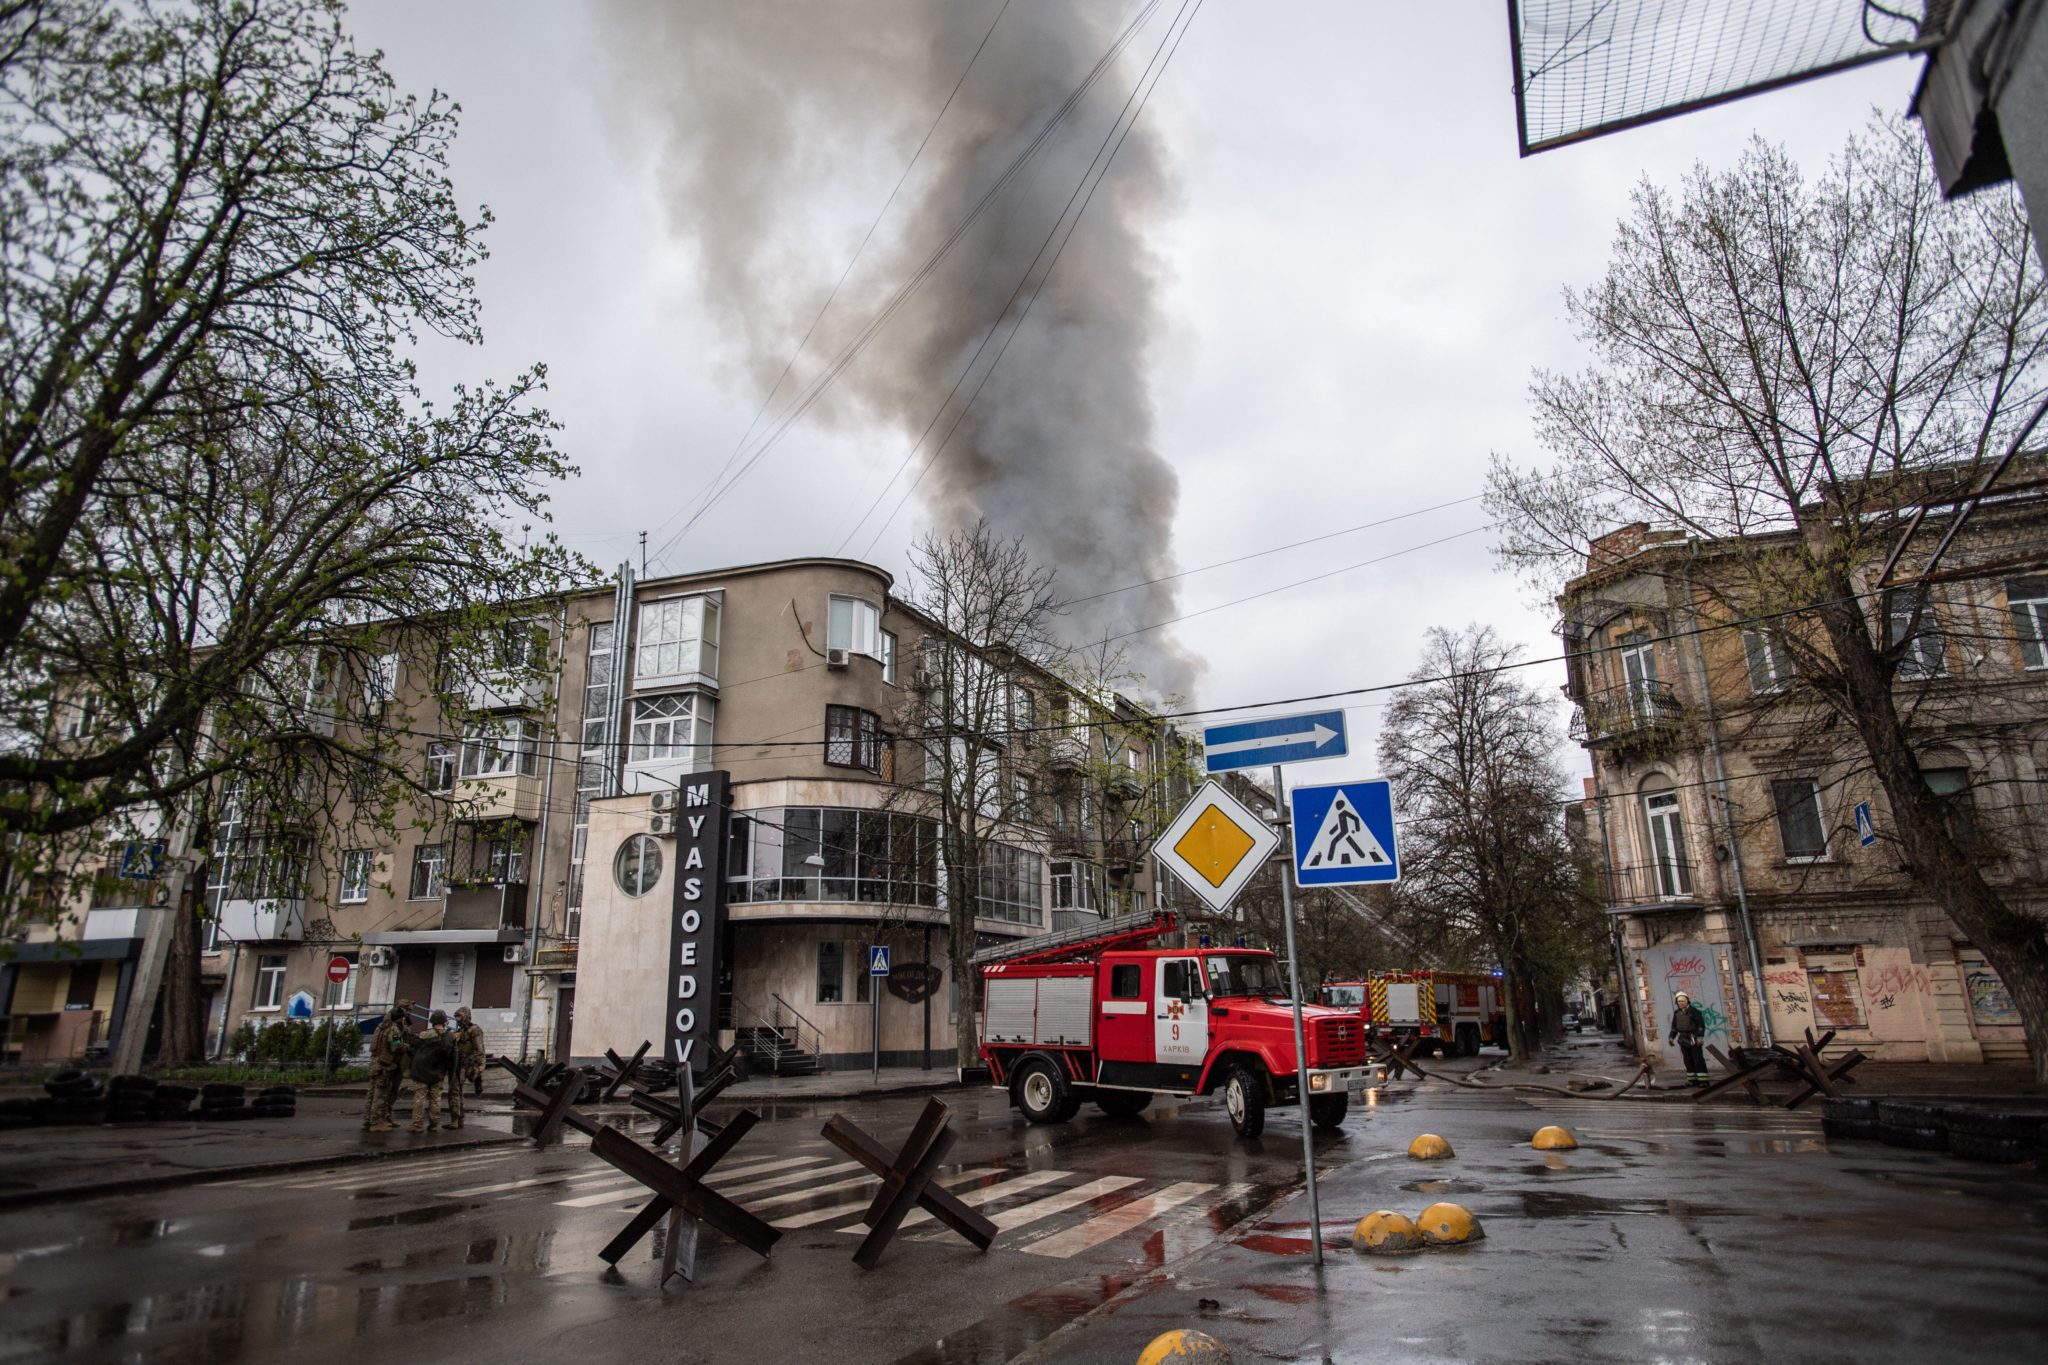 First responders arrive at the scene after a Russian rocket strike on the centre of Kharkiv, 17-04-2022. Image: ZUMA Press Inc / Alamy Stock Photo